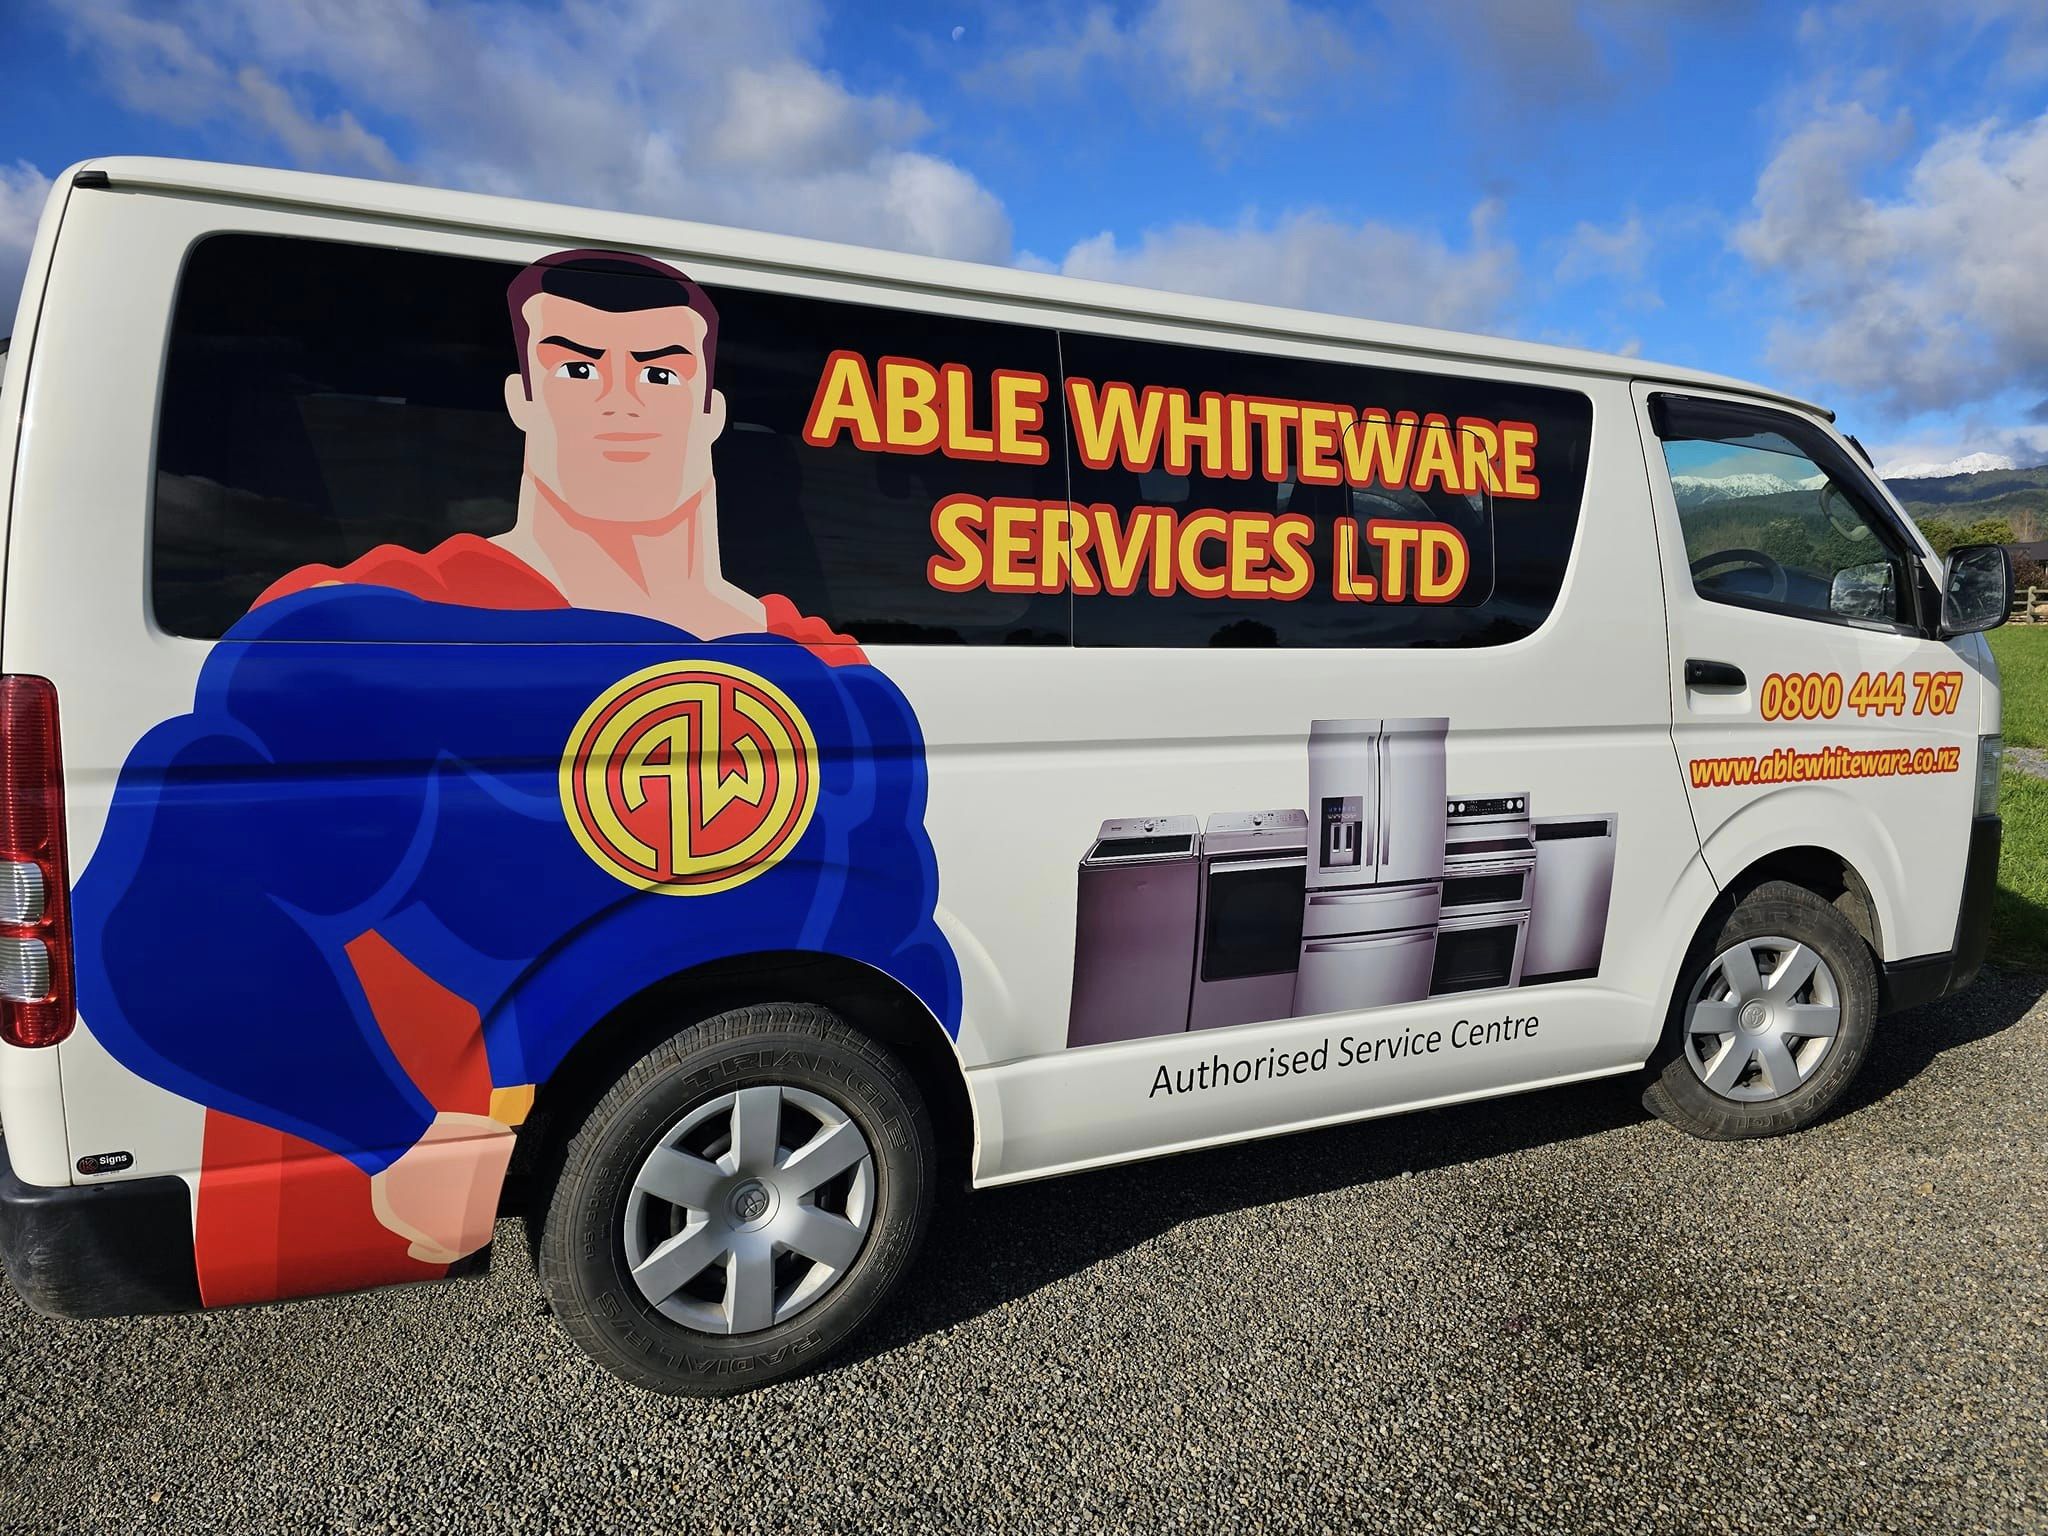 Able Whiteware Services